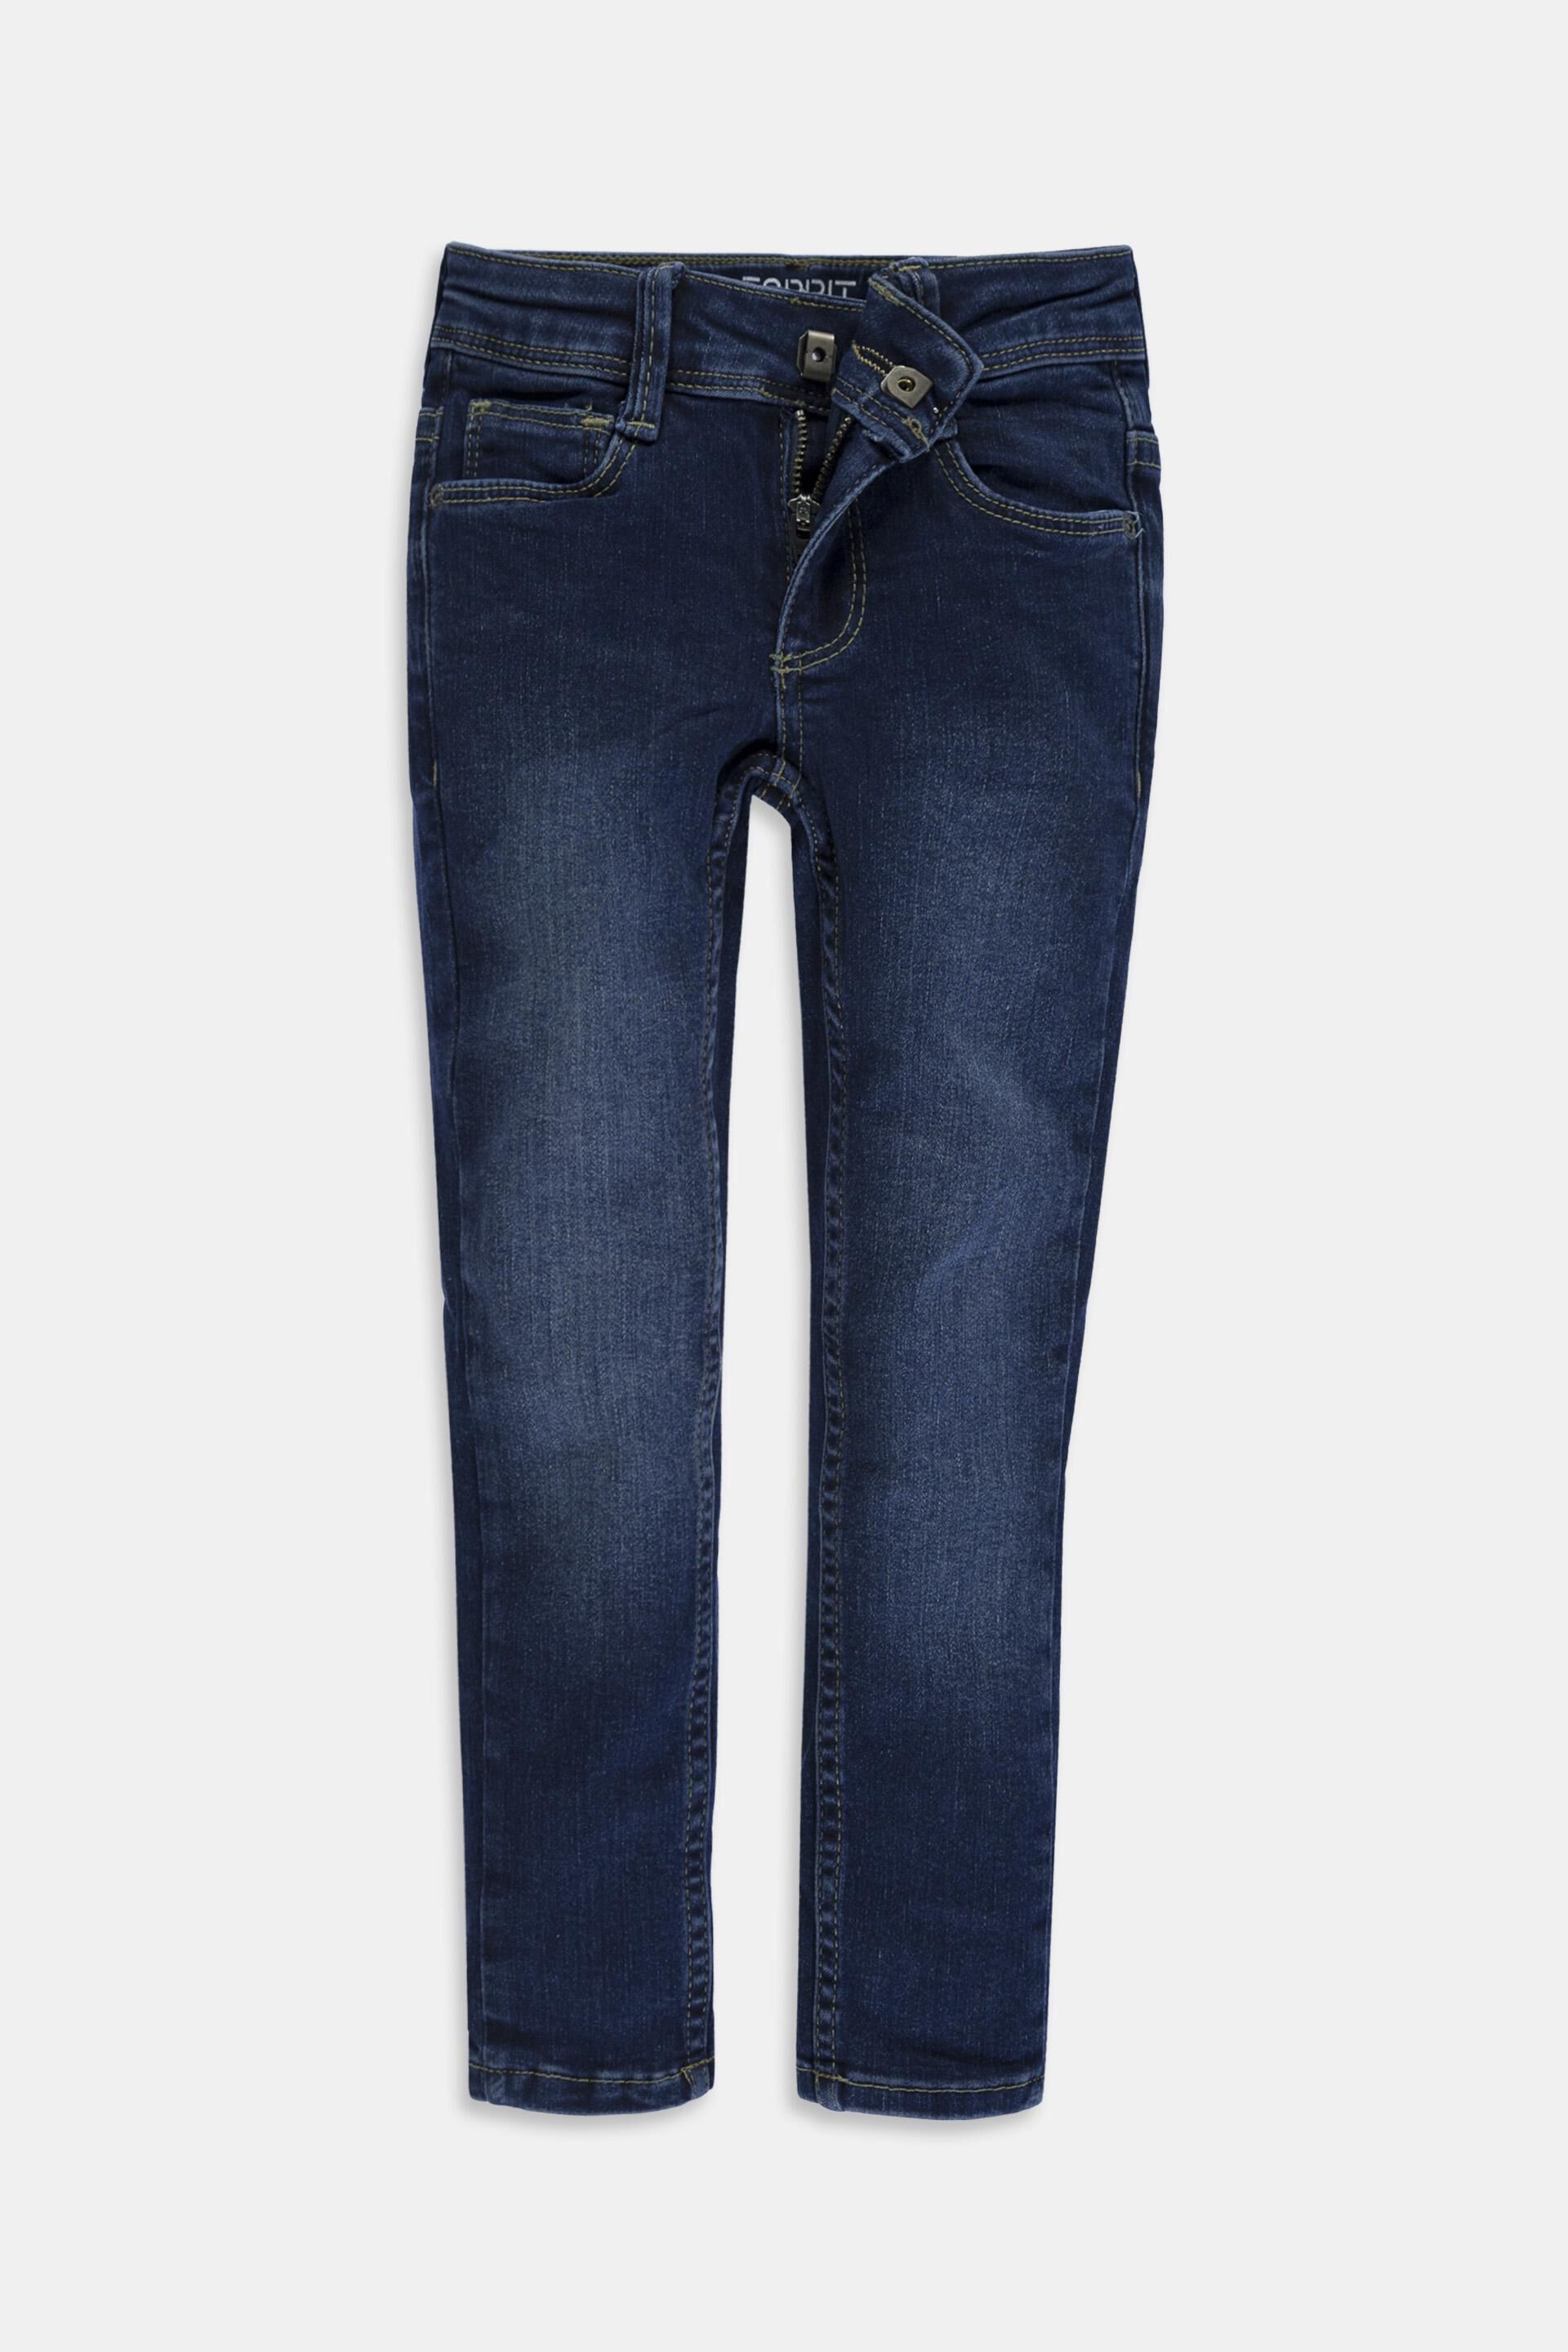 Esprit different widths available jeans Stretch in with adjustable waistband an